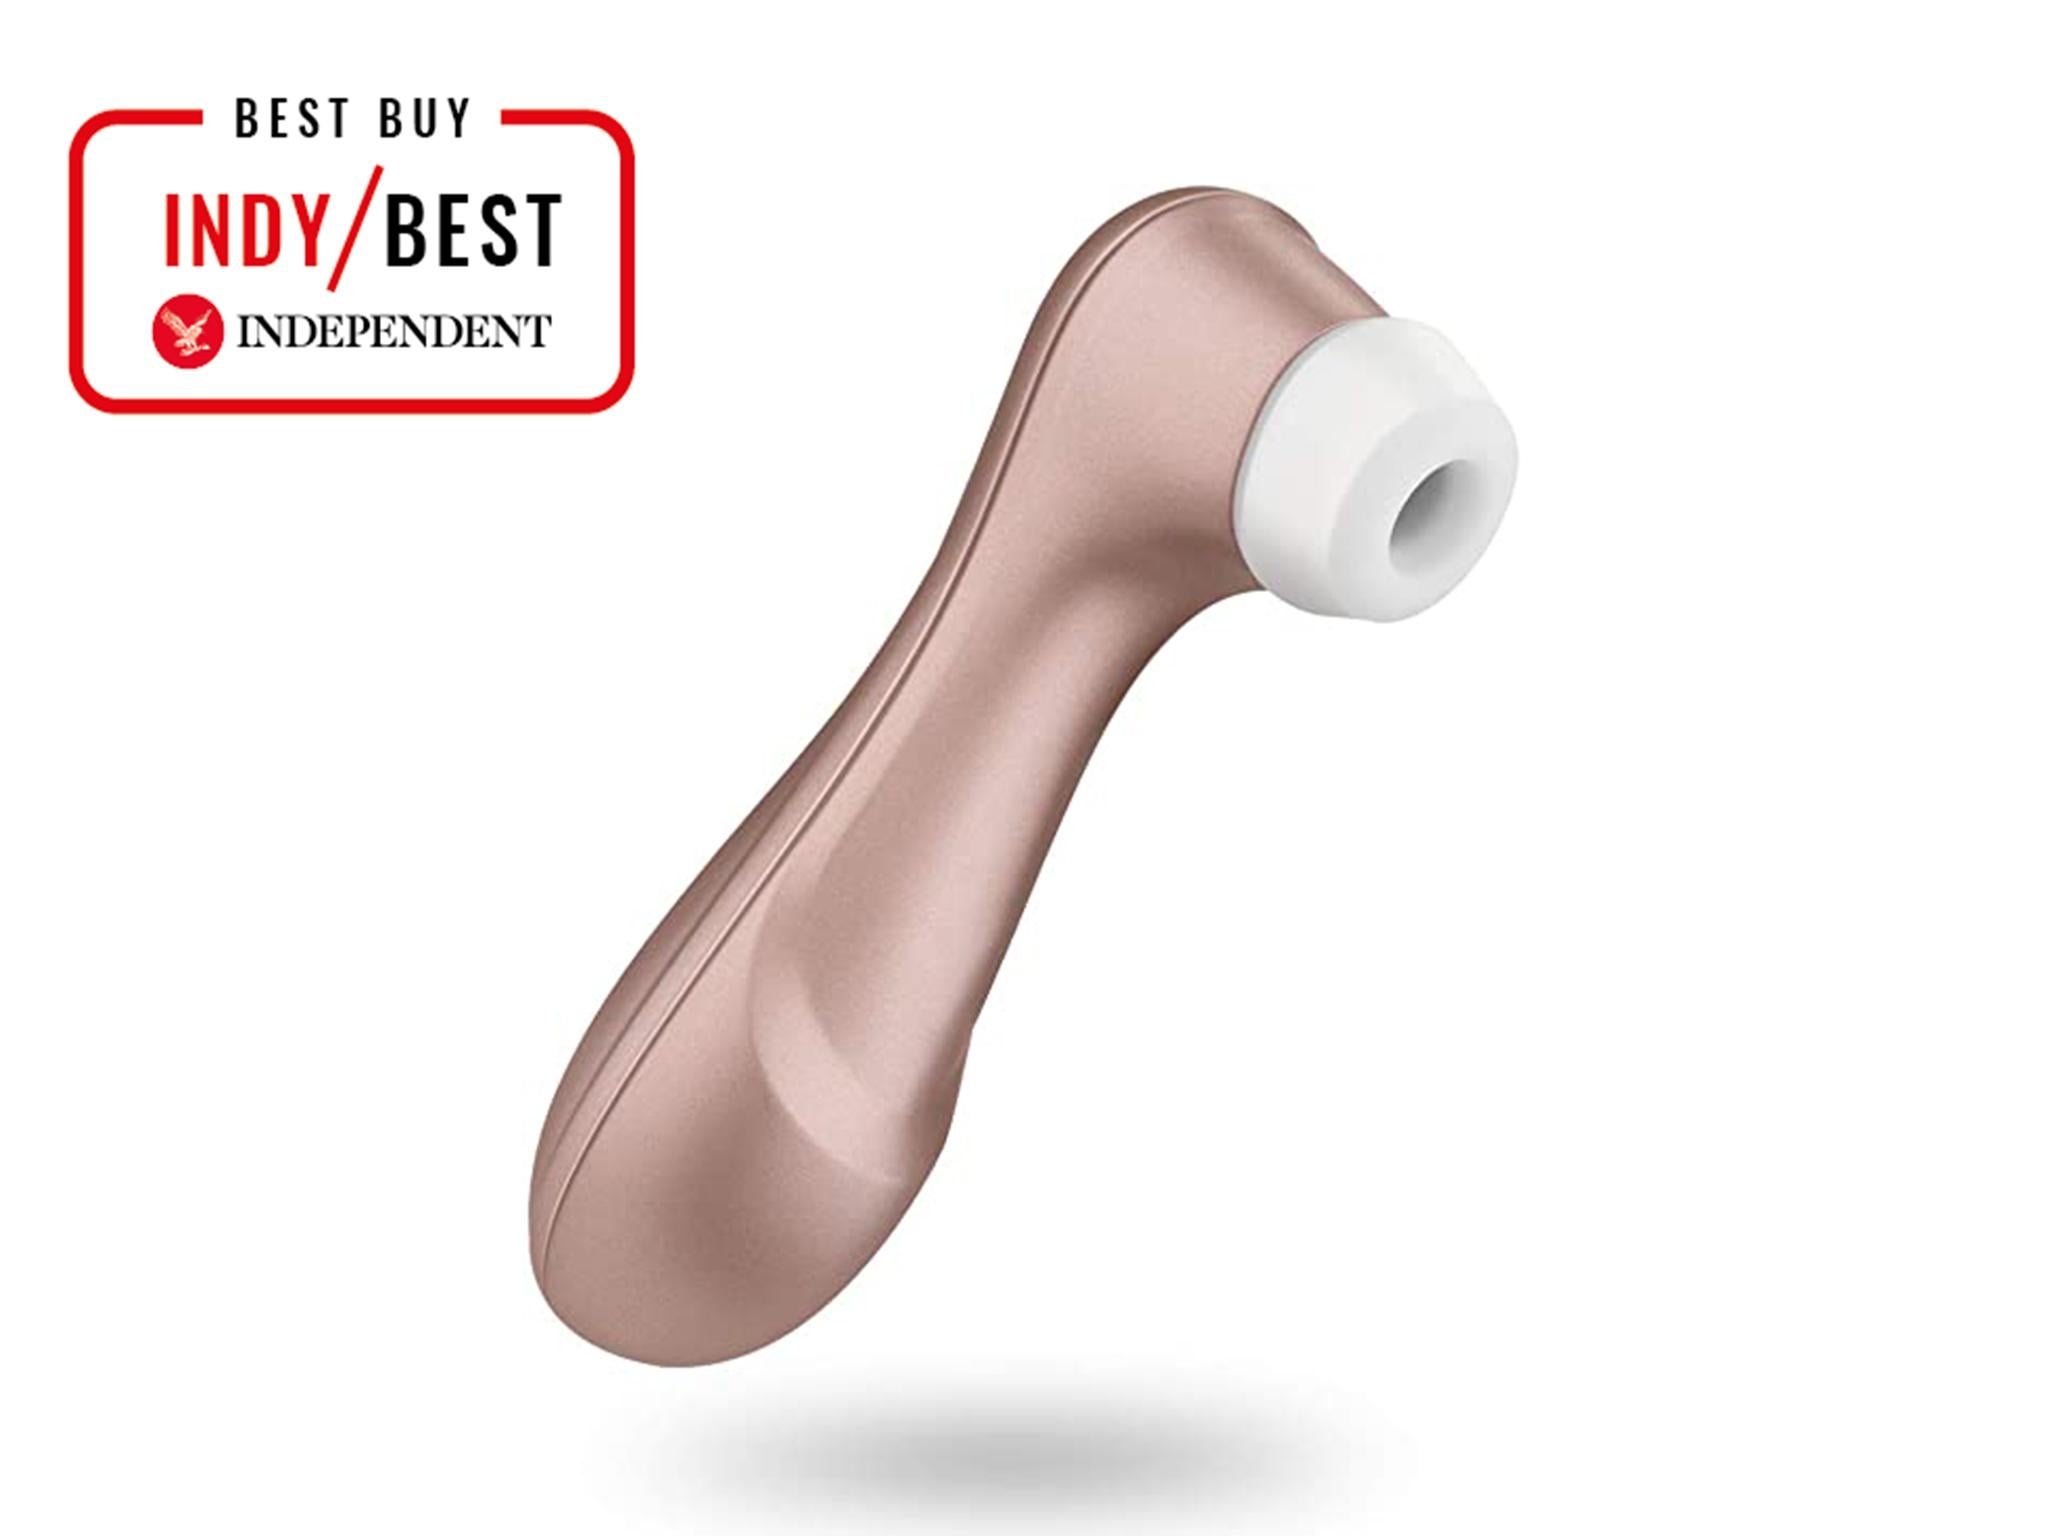 non-professional with glass sex tool